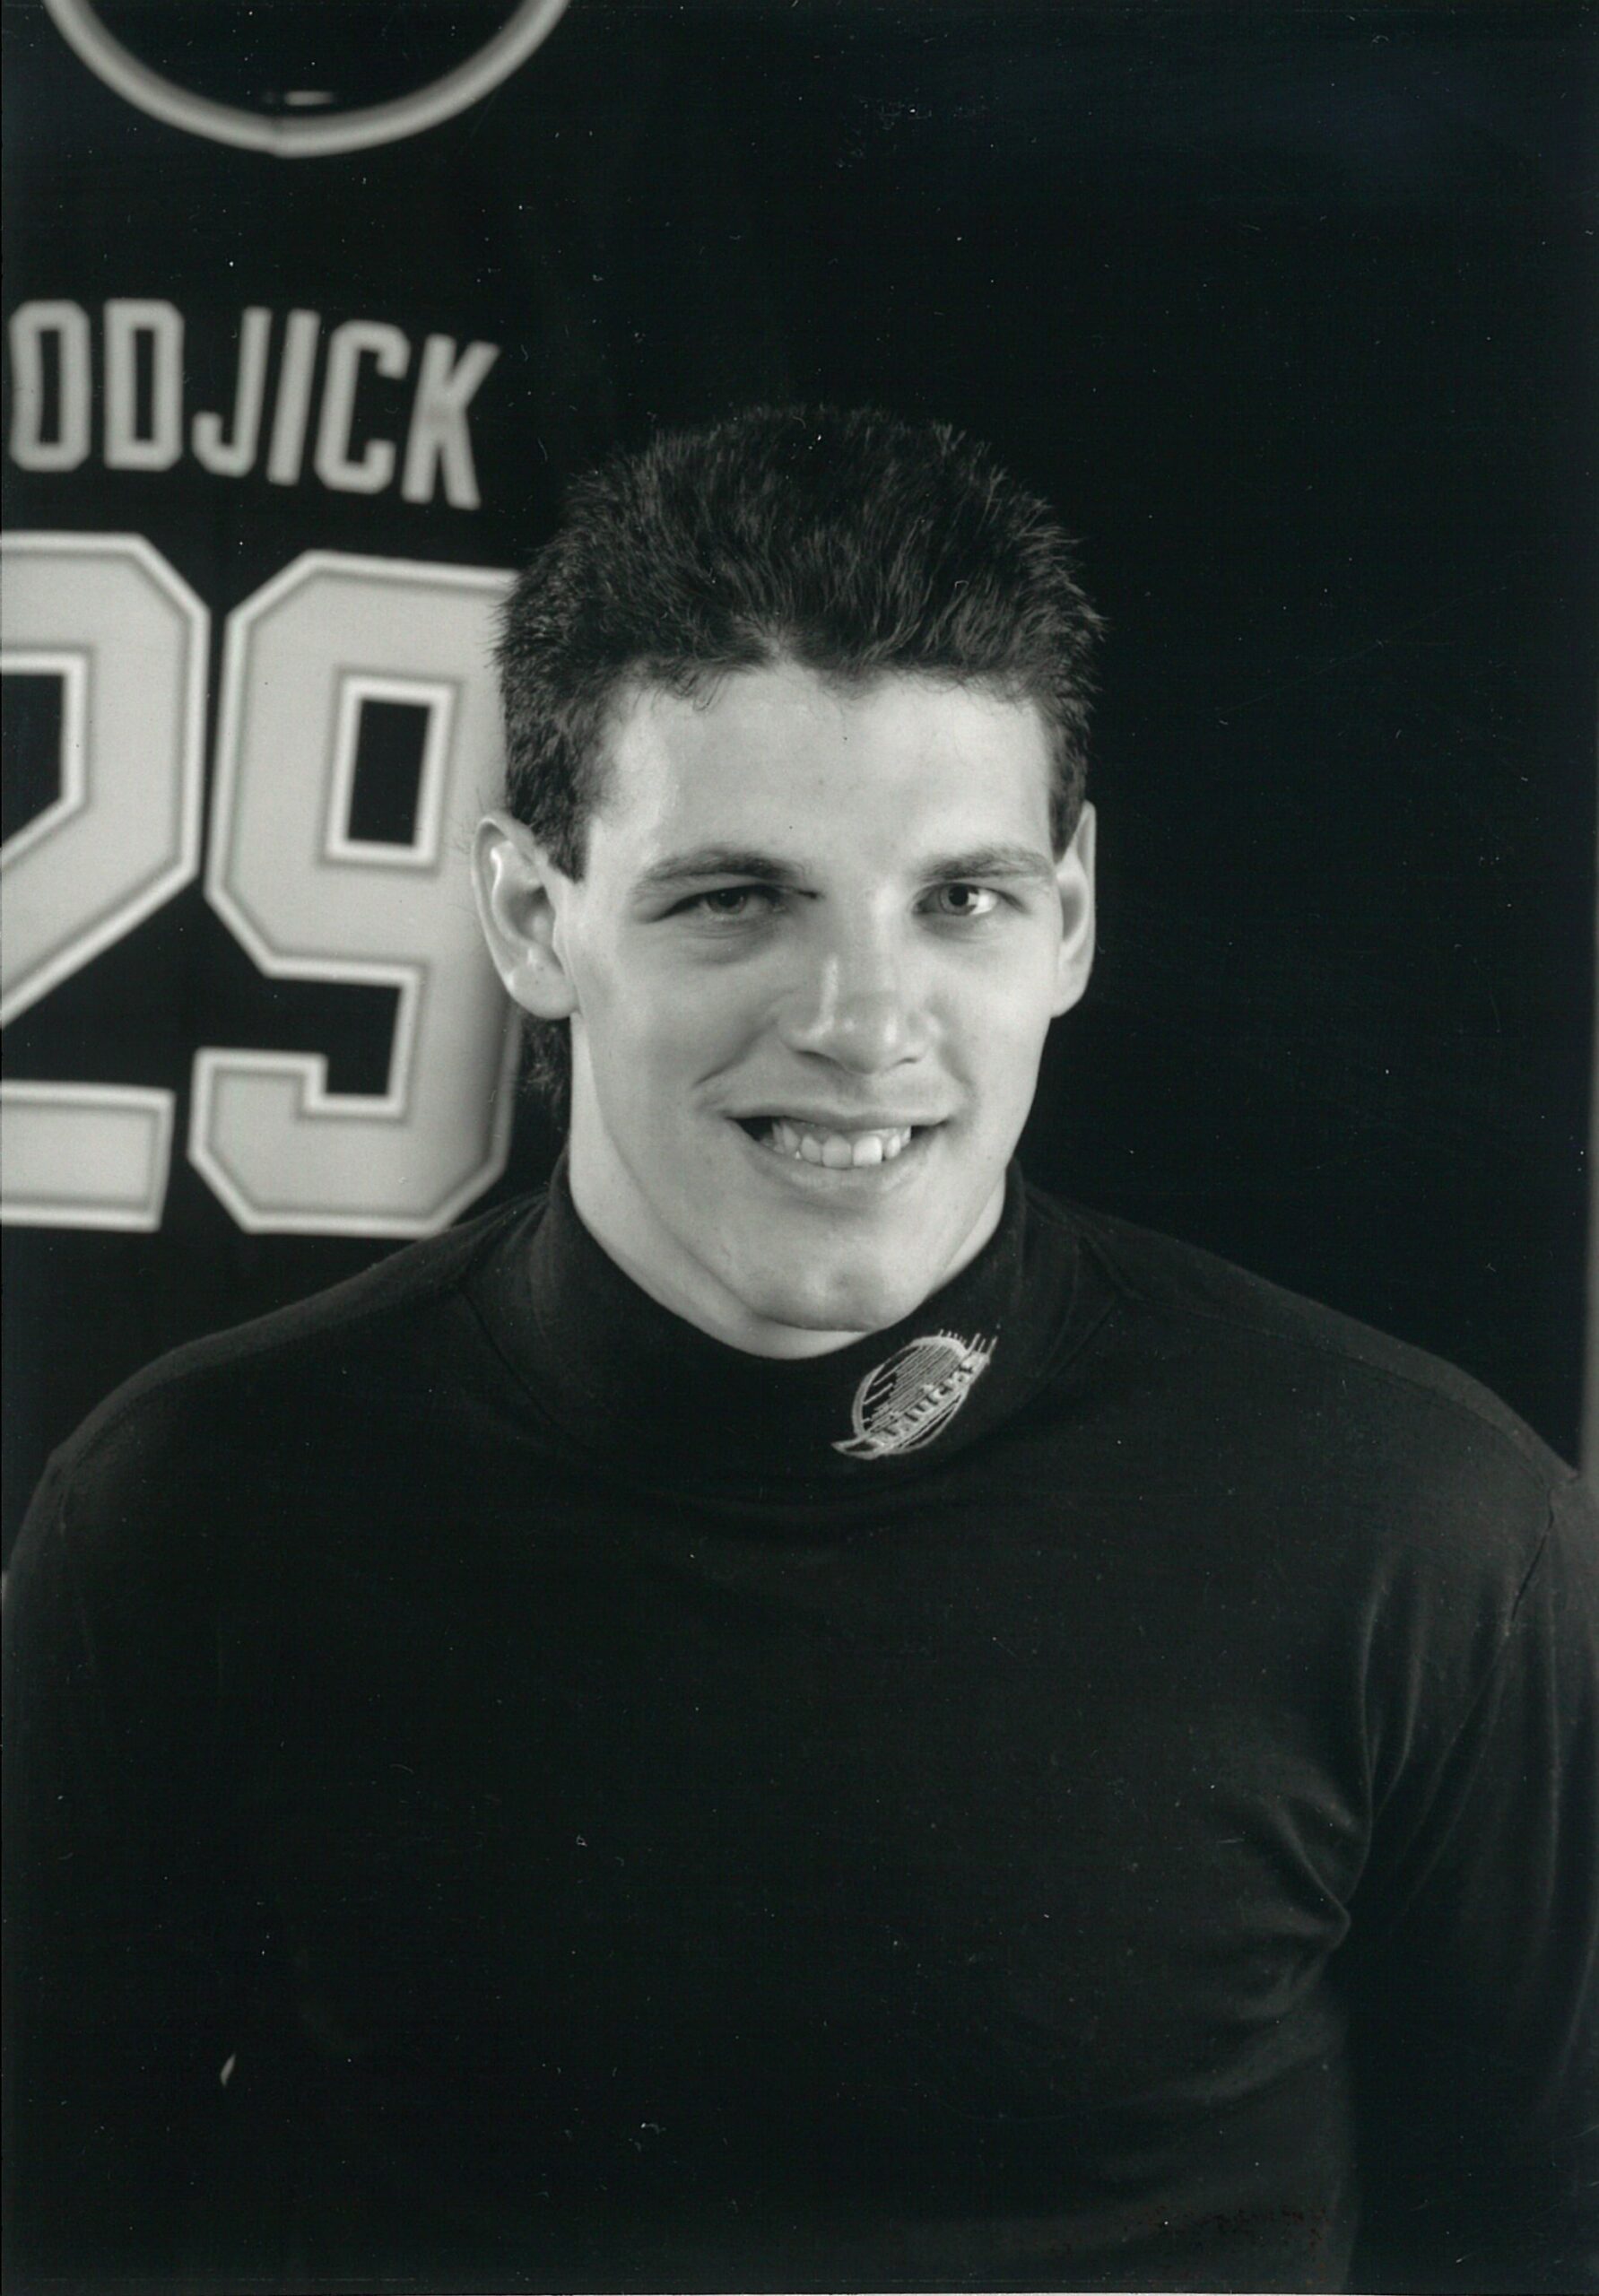 Gino Odjick memorial held at Musqueam Nation community centre - Vancouver  Is Awesome